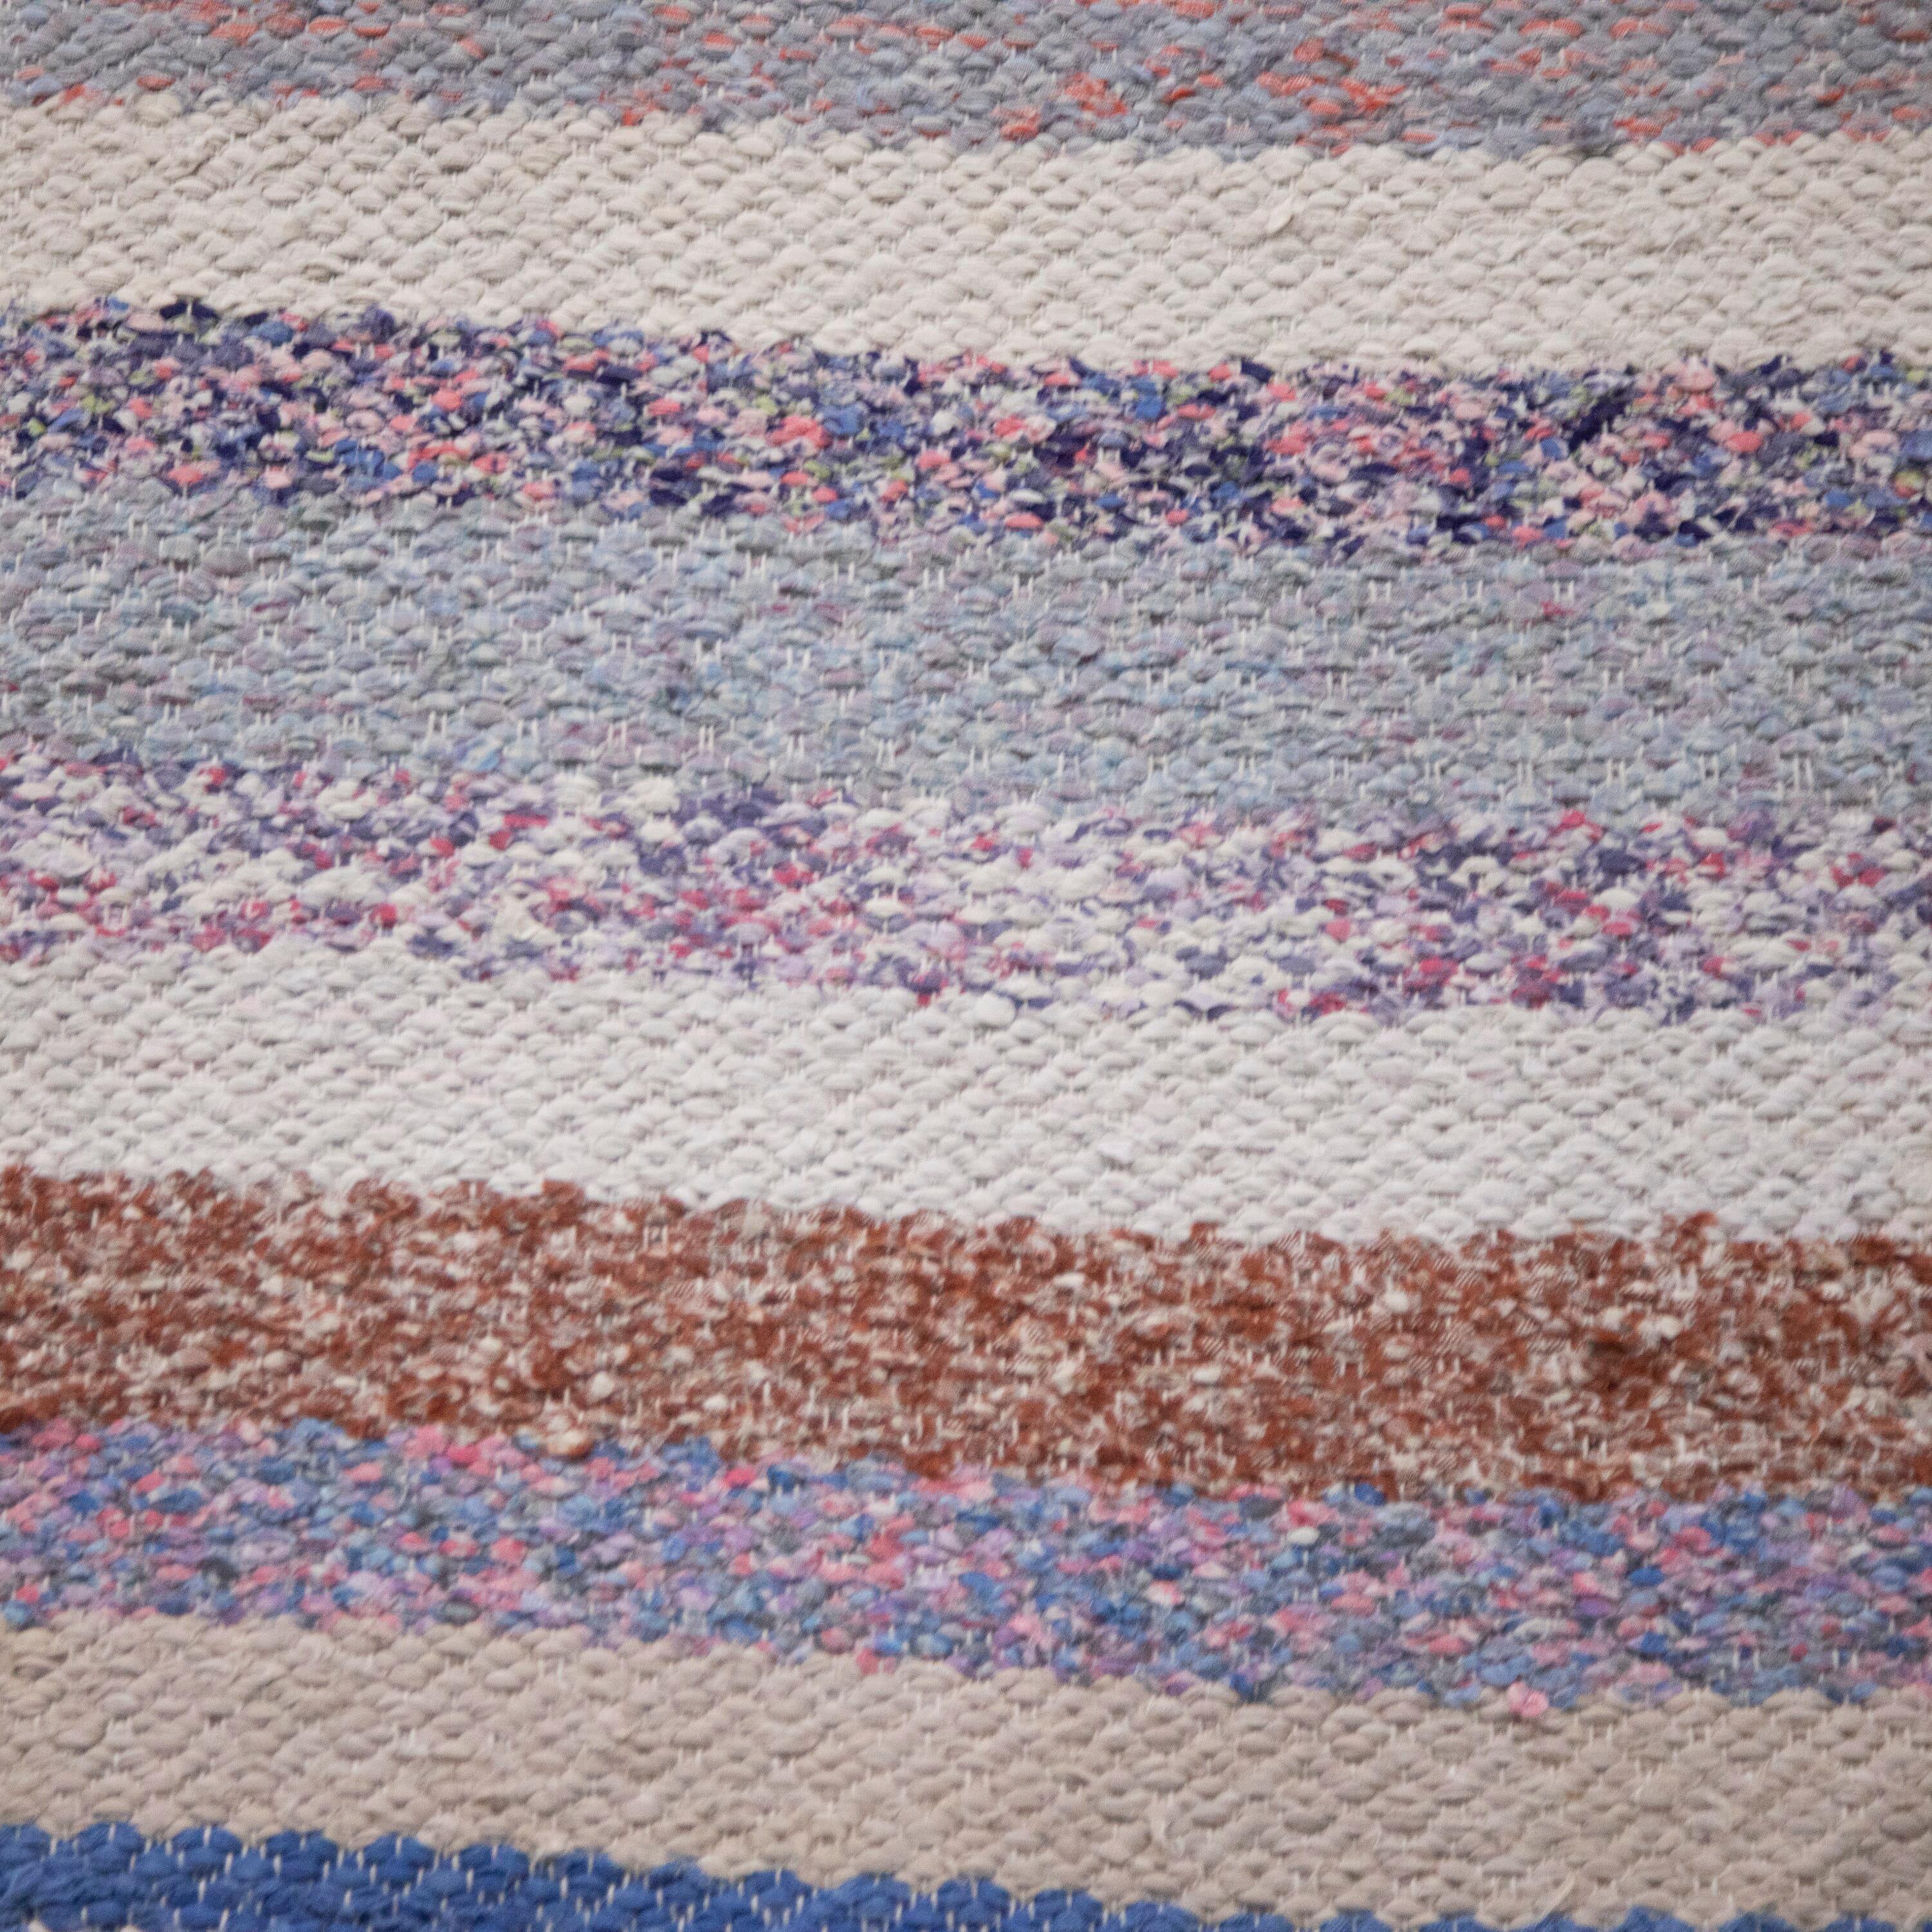 20th Century Swedish rag rug. Featuring a muted stripe design in blue, ecru, and sage green. This rug can be machine-washed at 30 degrees.
RT6024478.